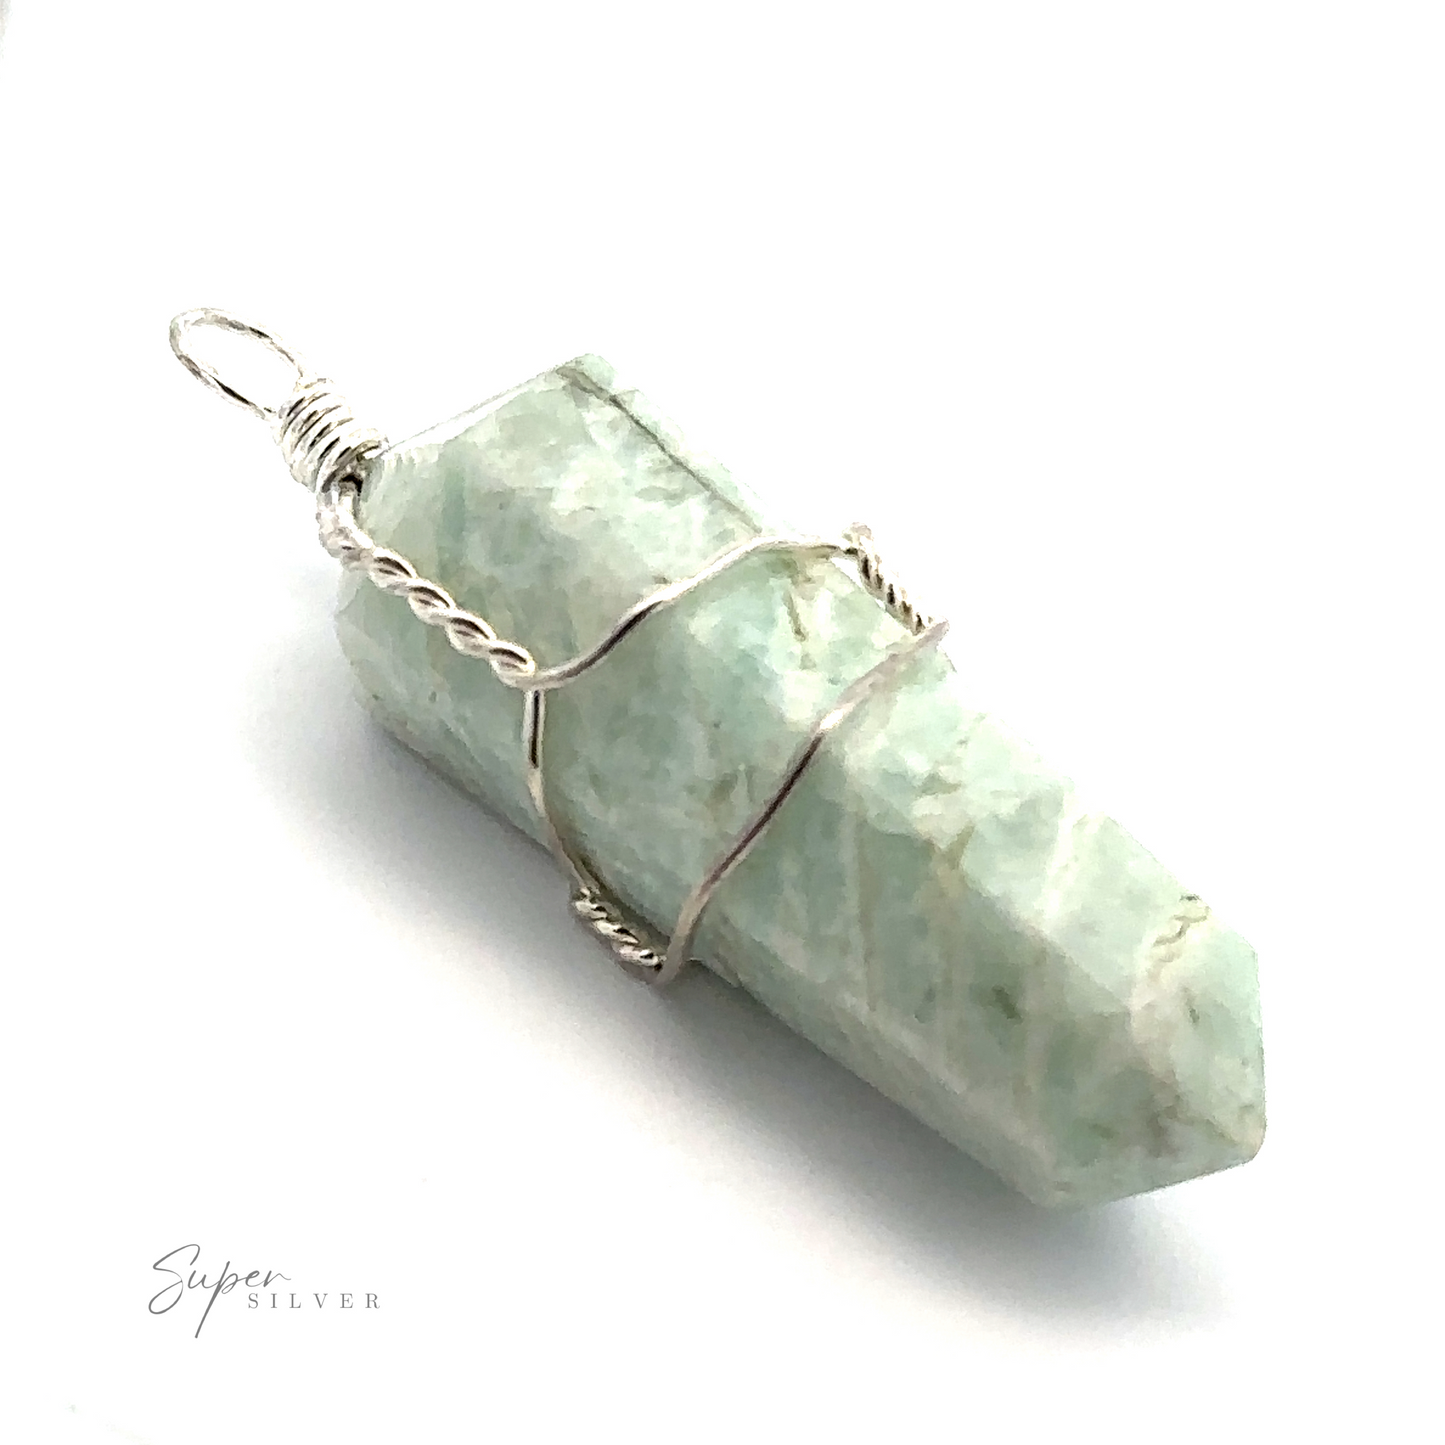 
                  
                    A Wire-Wrapped Stone Pendant with a pale green, obelisk-shaped gemstone pendant with a pointed end, wrapped in silver wire. The word "Super Silver" is written near the bottom left corner.
                  
                